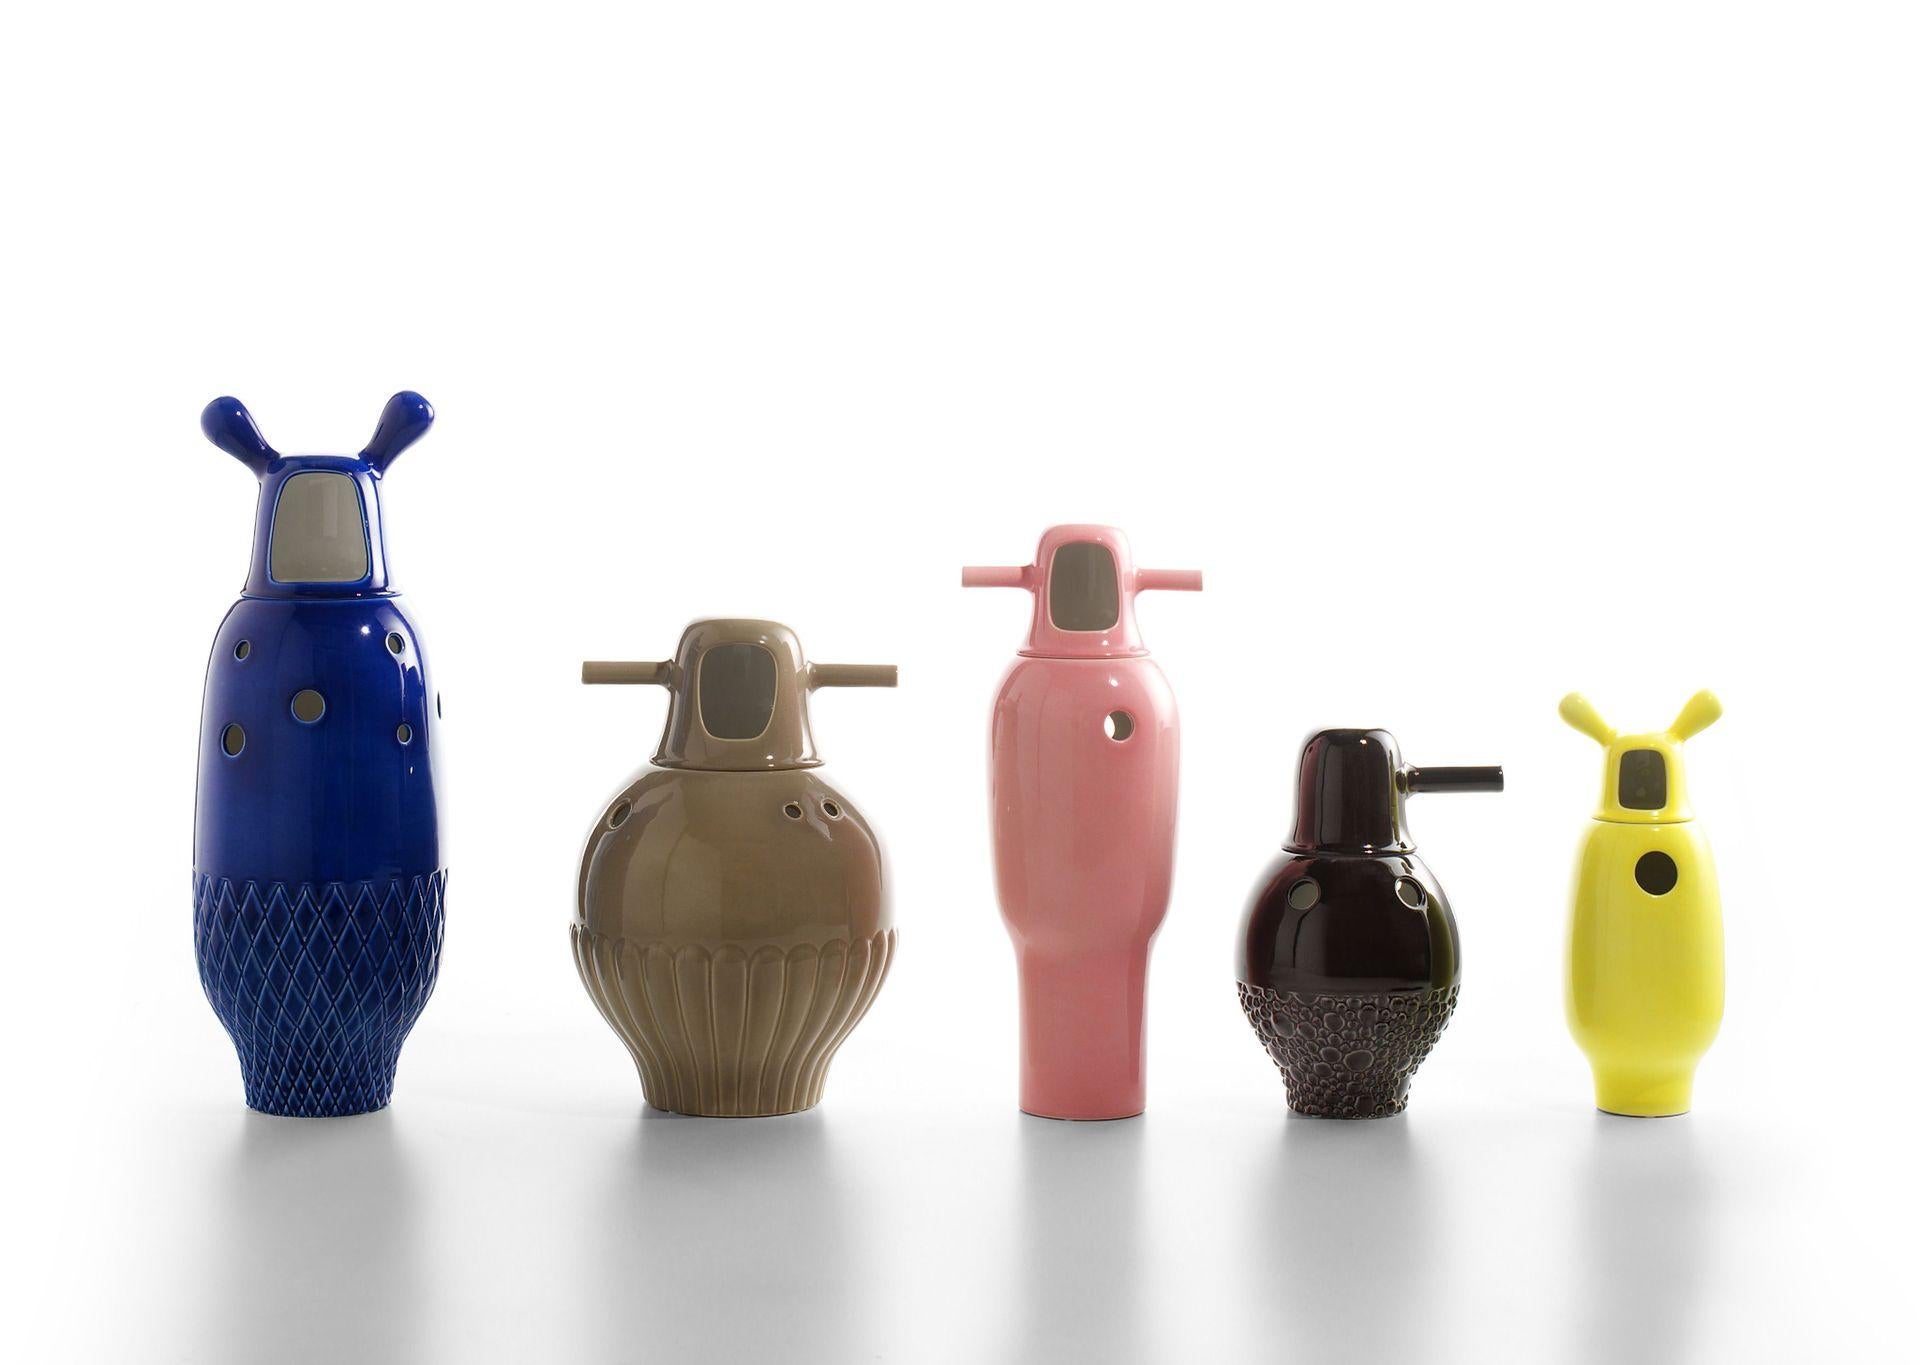 Set of colored showtime vases by Jaime Hayon 
Dimensions: D19 x H33, D31 x H34, D27 x H47, D21 x H48, D23 x 59 cm
Materials: Made in two pieces in enameled stoneware porcelain; monocolour (interior and external in white) or bicolor (interior in